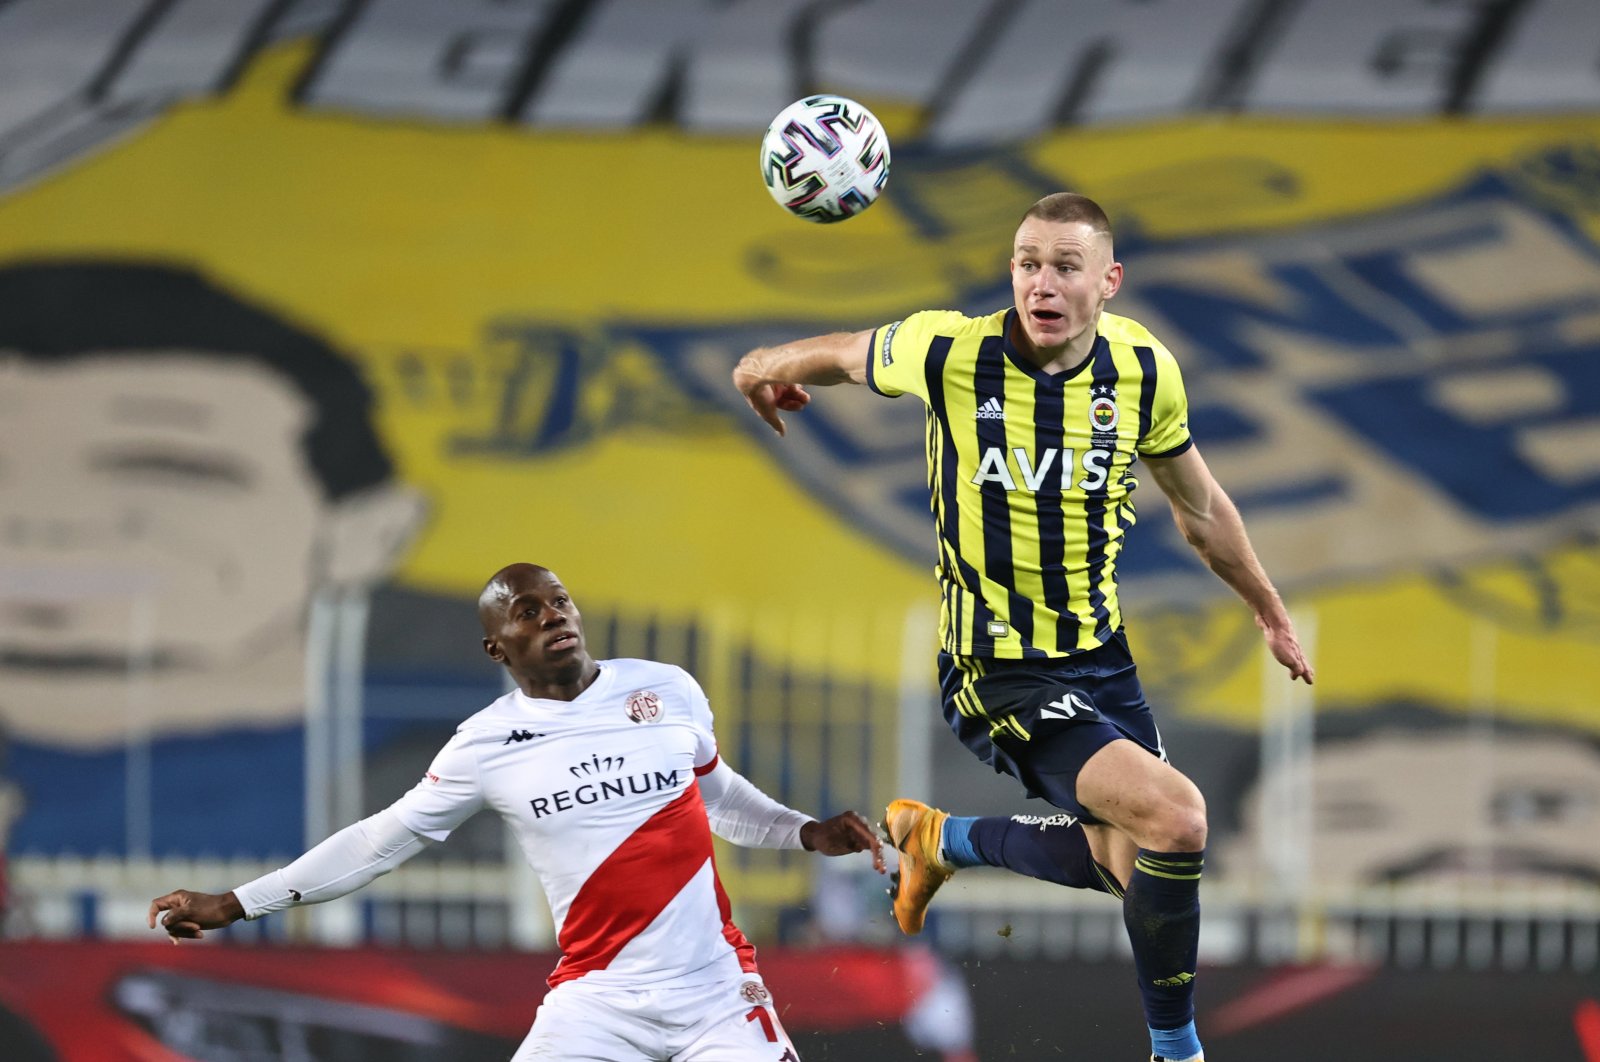 Fenerbahçe center-back Attila Szalai (R) is seen in action during a match between Fenerbahçe and Fraport TAV Antalyaspor in Istanbul, Turkey, March 4, 2021. (AA Photo)